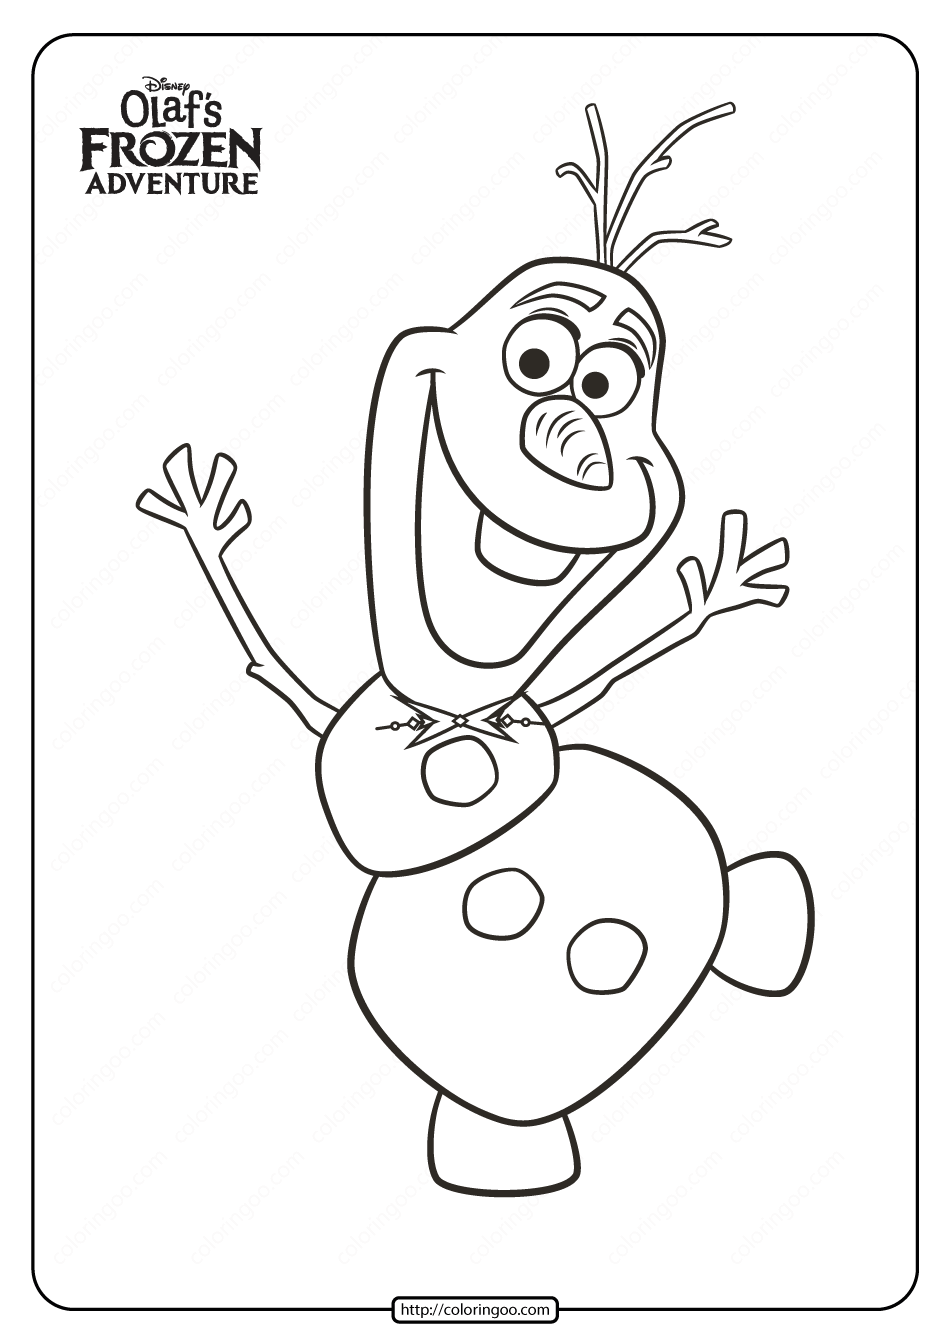 Disney Olaf's Frozen Adventure Coloring Pages 03